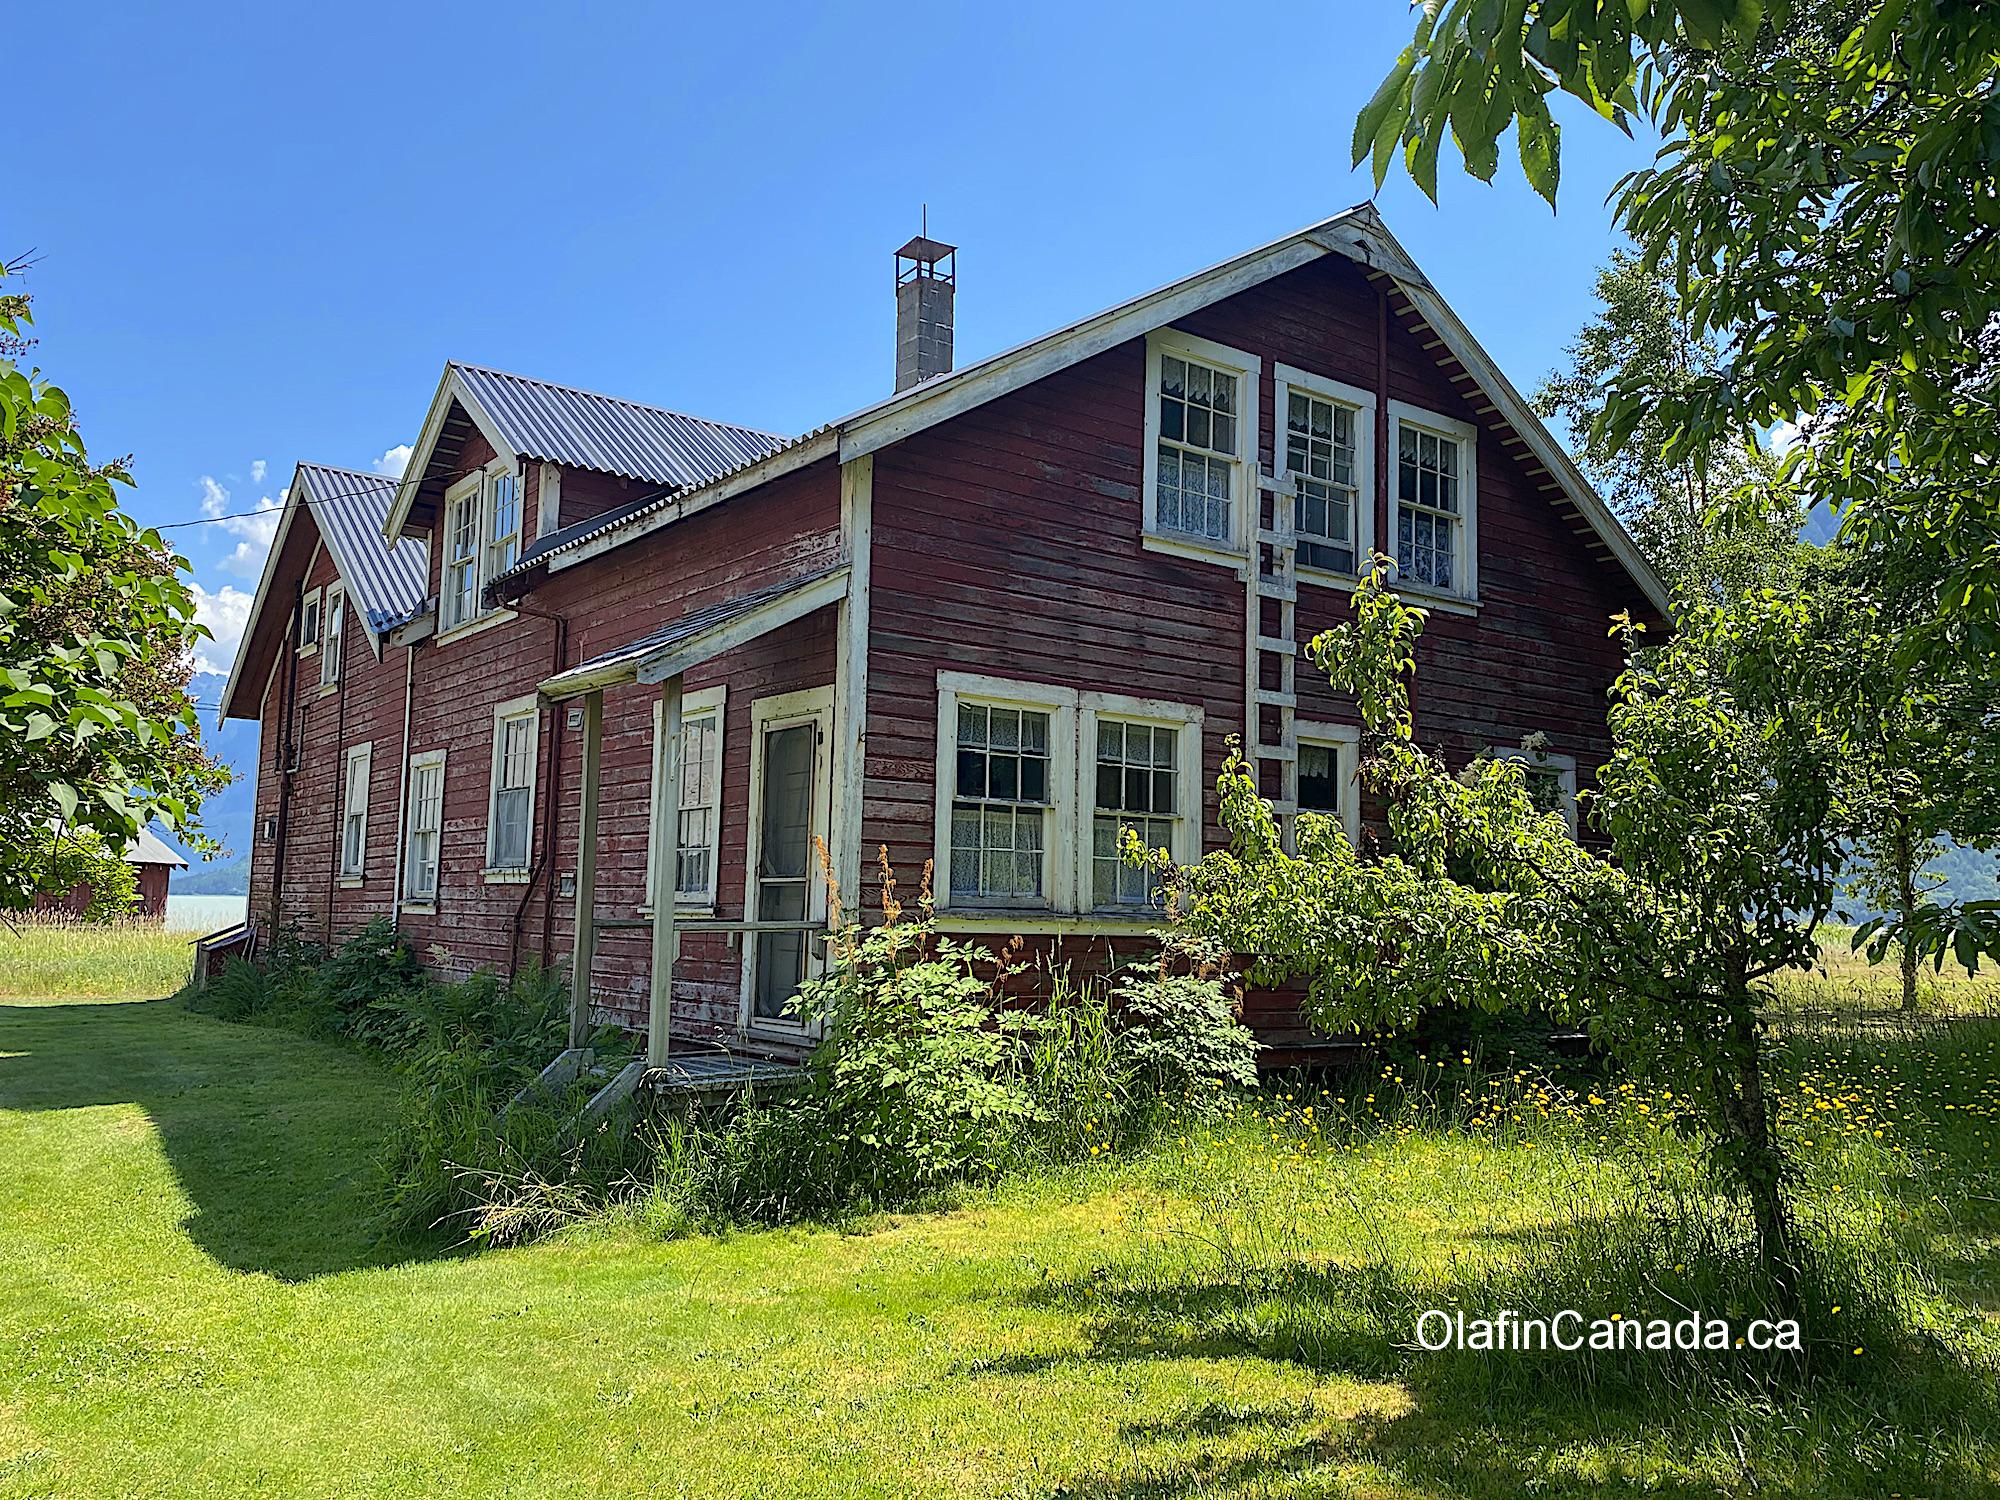 The guesthouse at the Tallheo Cannery #olafincanada #britishcolumbia #discoverbc #abandonedbc #tallheocannery #bellacoola